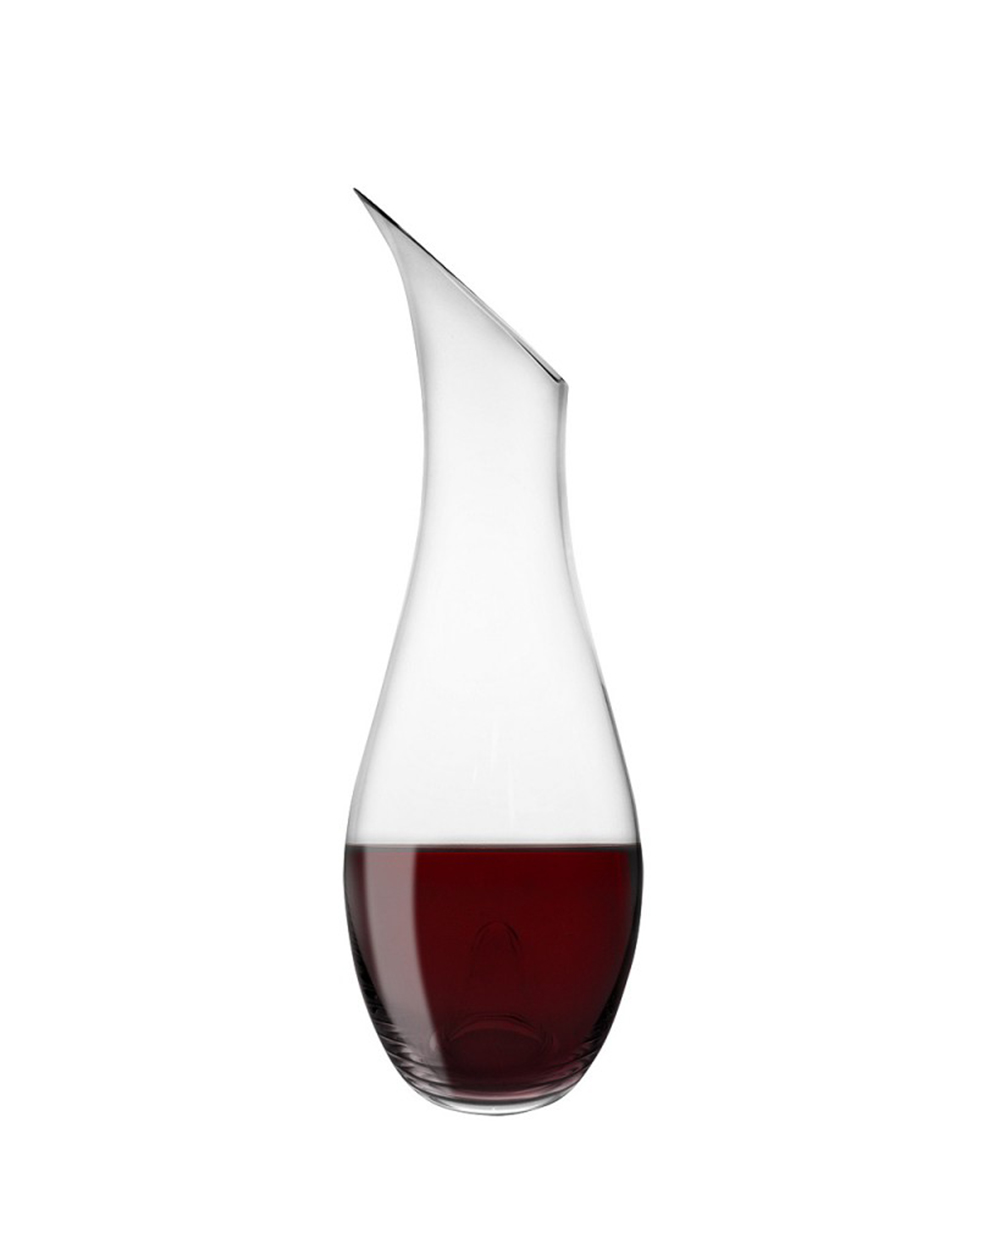 Riedel O’Magnum wine decanter, $439, from Smith and Caugheys.